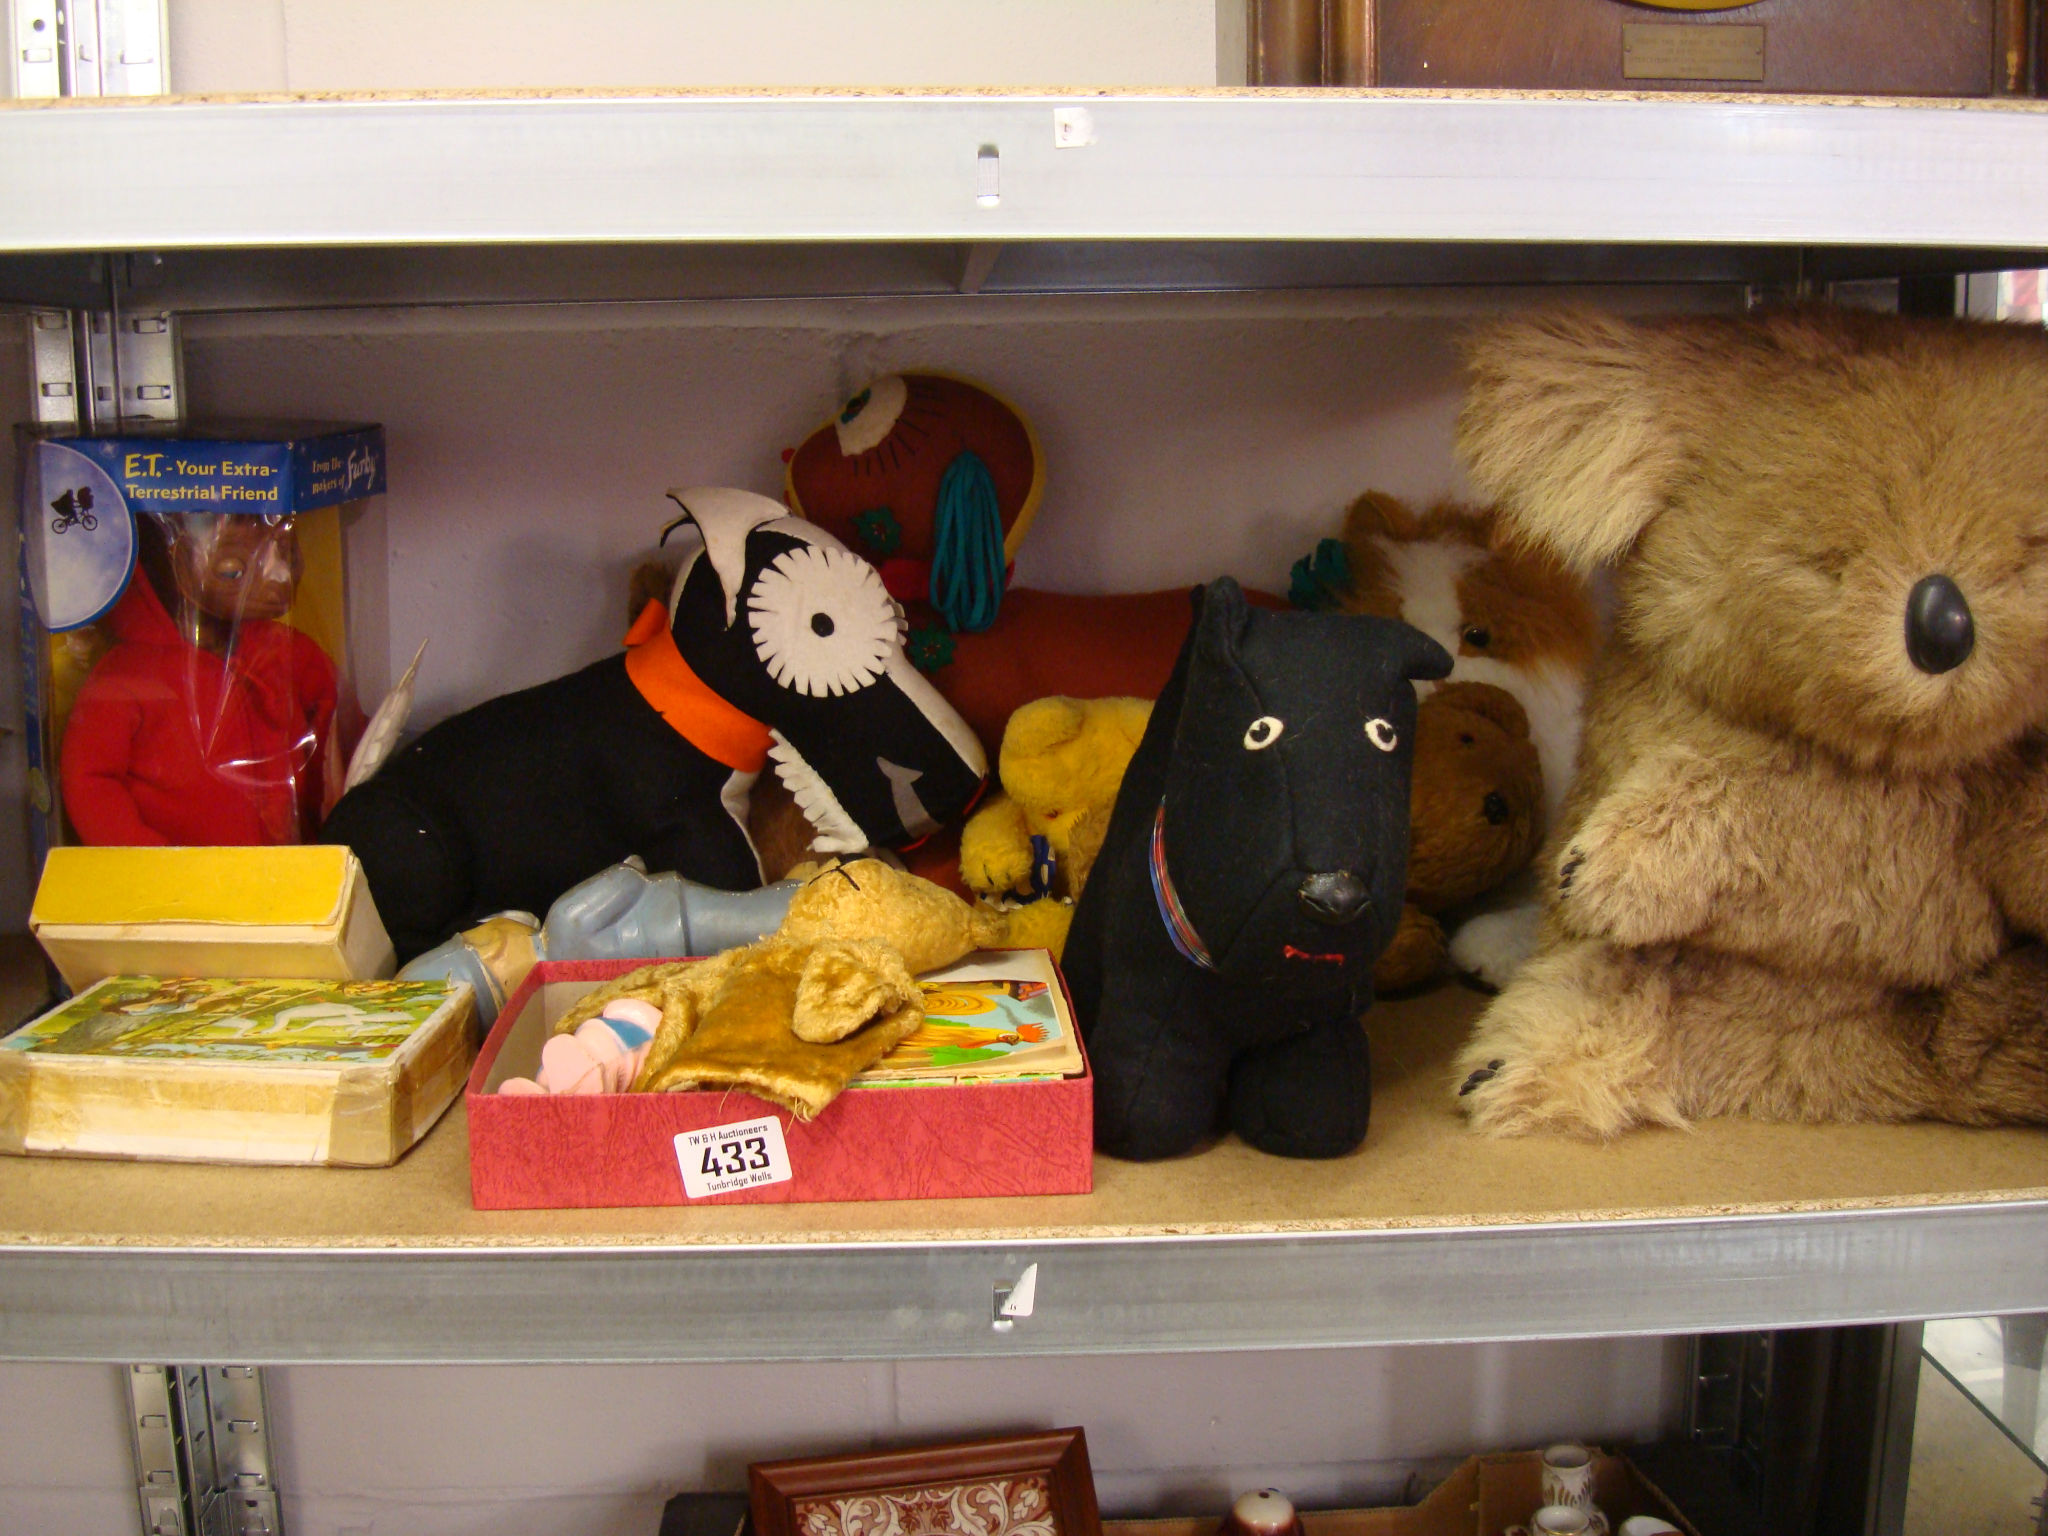 A Chiltern`s Sooty hand puppet, a plush koala, three picture blocks, and sundry soft toys